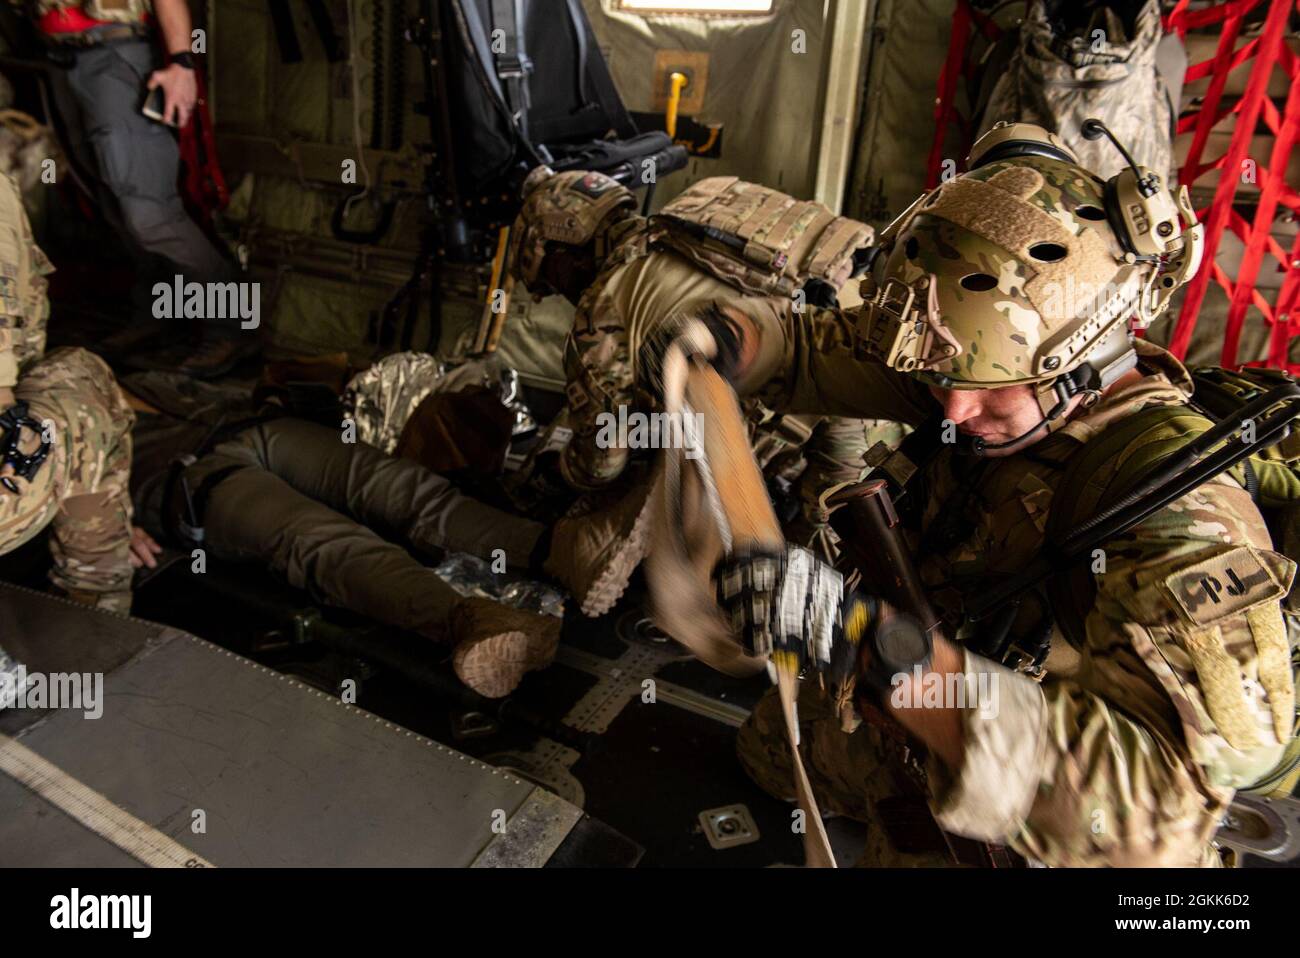 A U.S. Air Force Airman from the 57th Rescue Squadron prepares to secure a gurney while other members treat a simulated patient in-flight as part of Operation Stolen Cerberus VIII at Elefsis Air Base, Greece, May 12, 2021. The Hellenic armed forces participated in the scenario, which served to strengthen interoperability cohesion. The training reinforces the Agile Combat Employment capabilities of Hellenic armed forces and U.S. military members who operate with varying levels of support and resources. Stock Photo